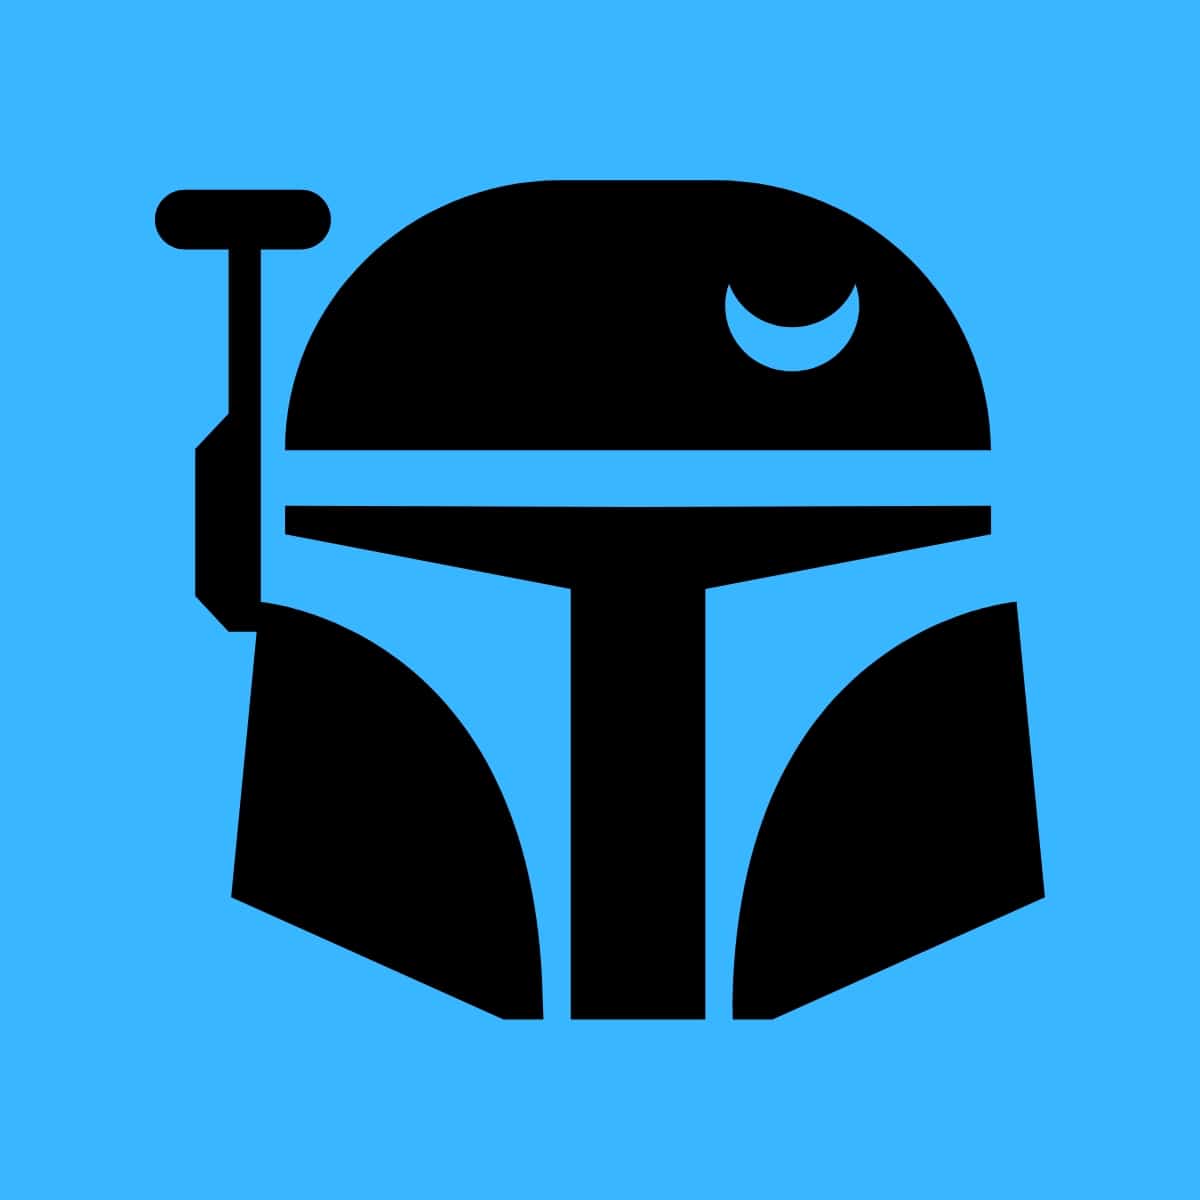 Cartoon graphic of a black bounty hunter helmet from star wars on a blue background.